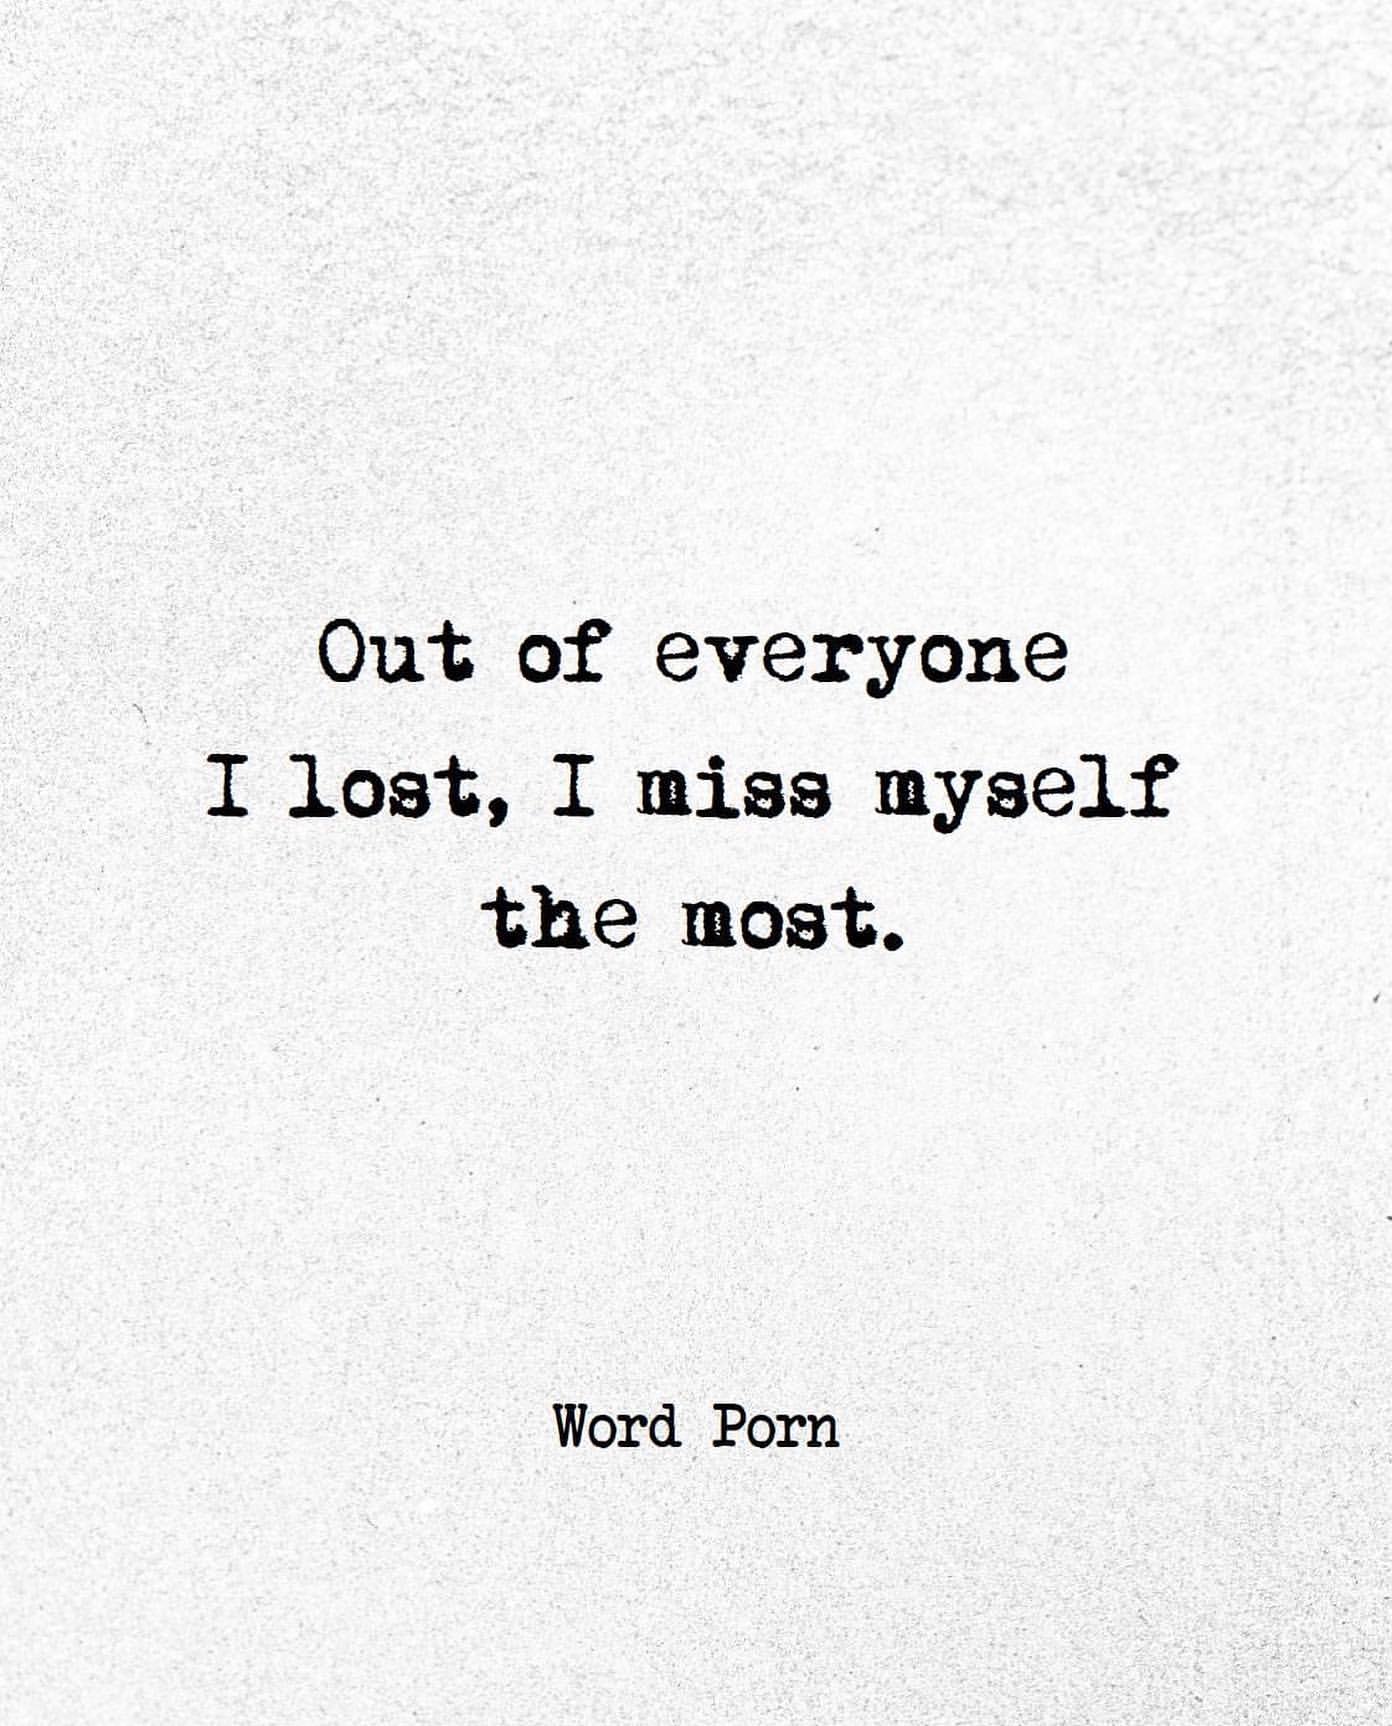 Out of everyone I lost, I miss myself the most.